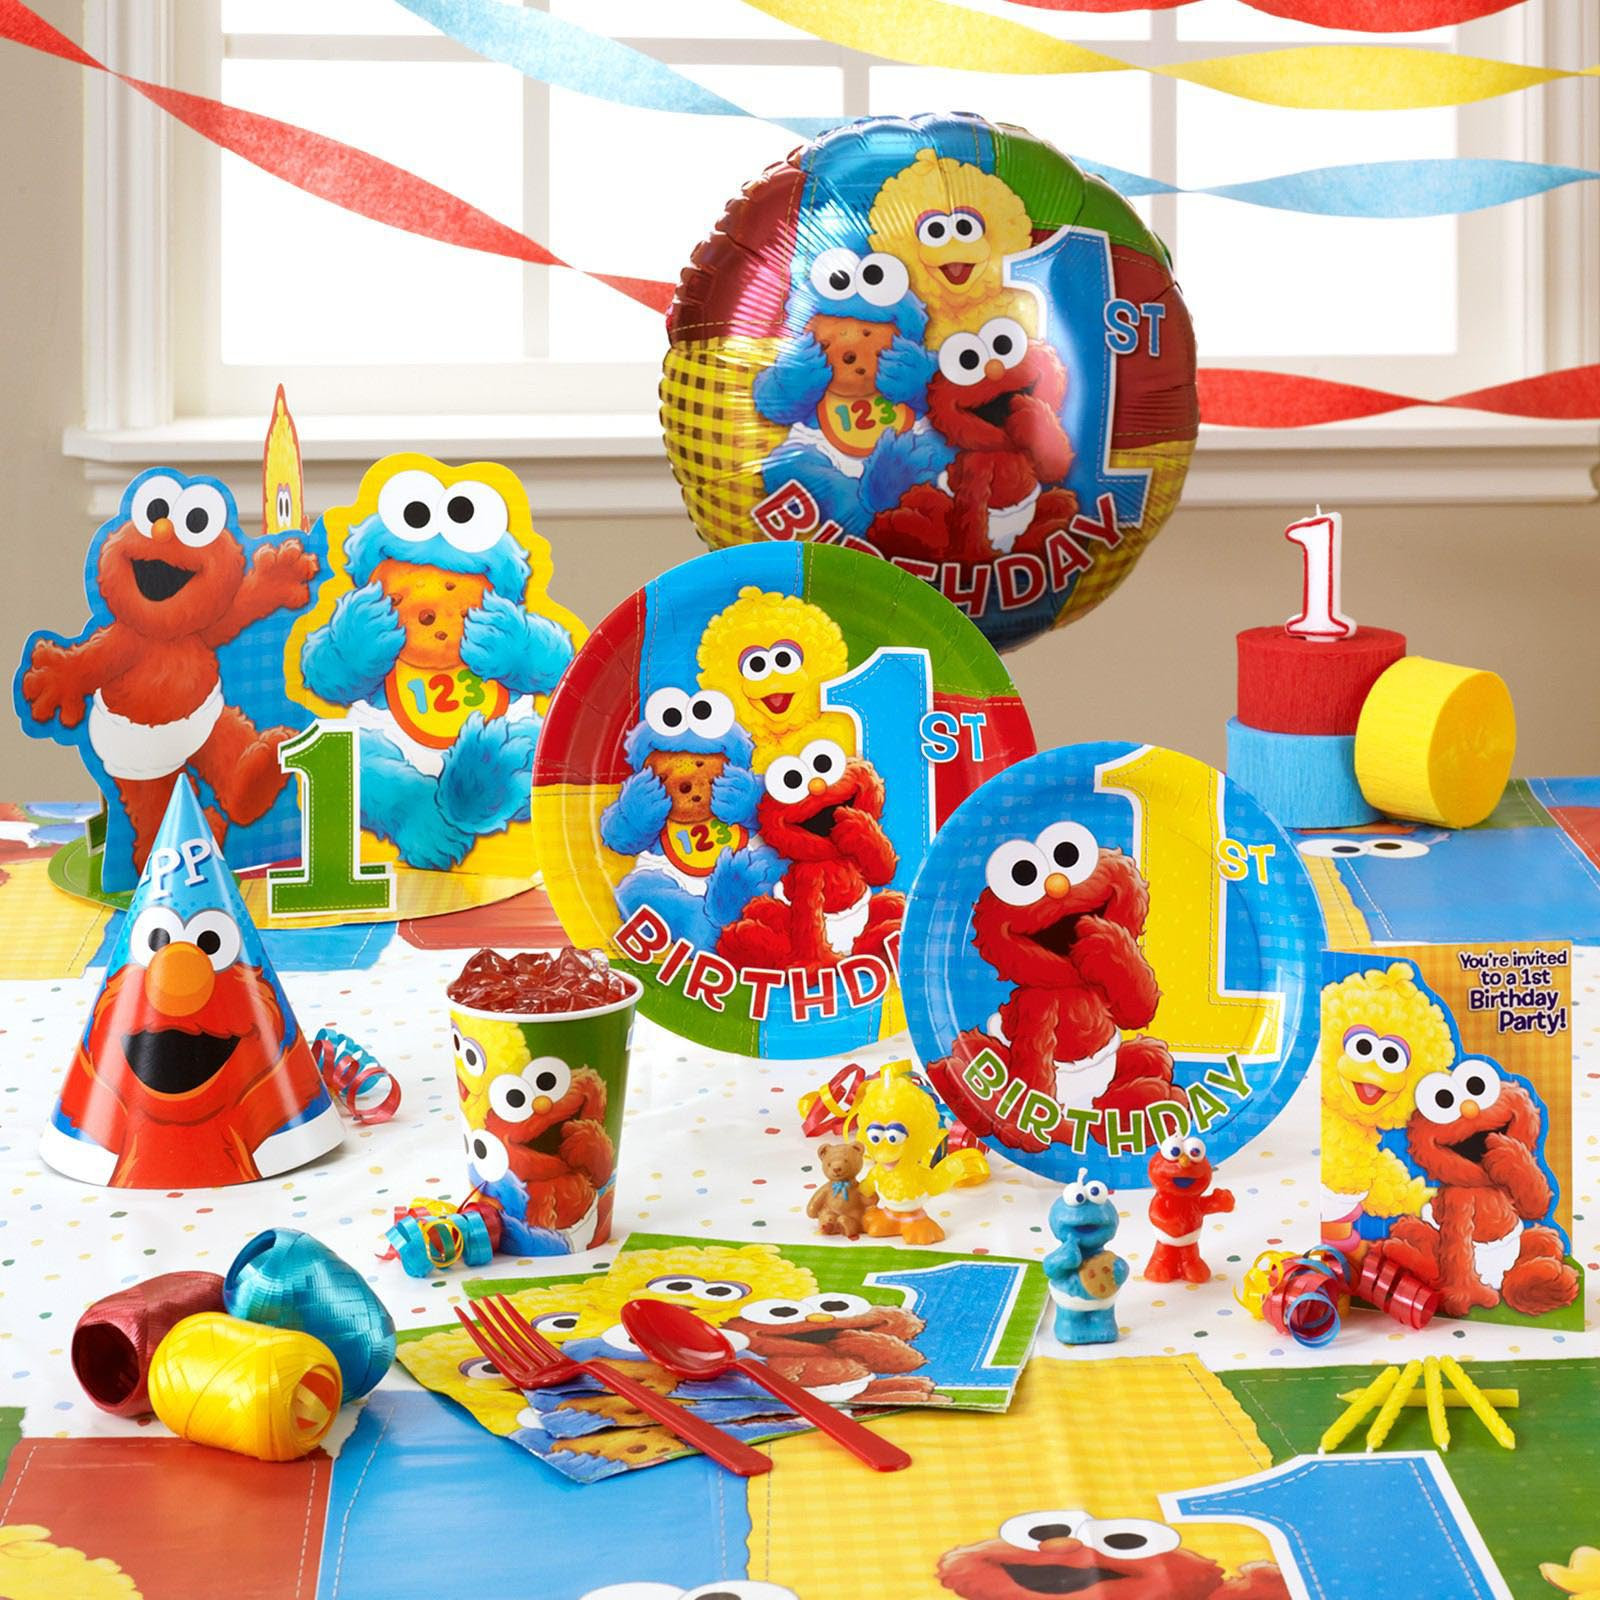 Baby First Birthday Party Supplies
 Elmo Birthday Party Tips